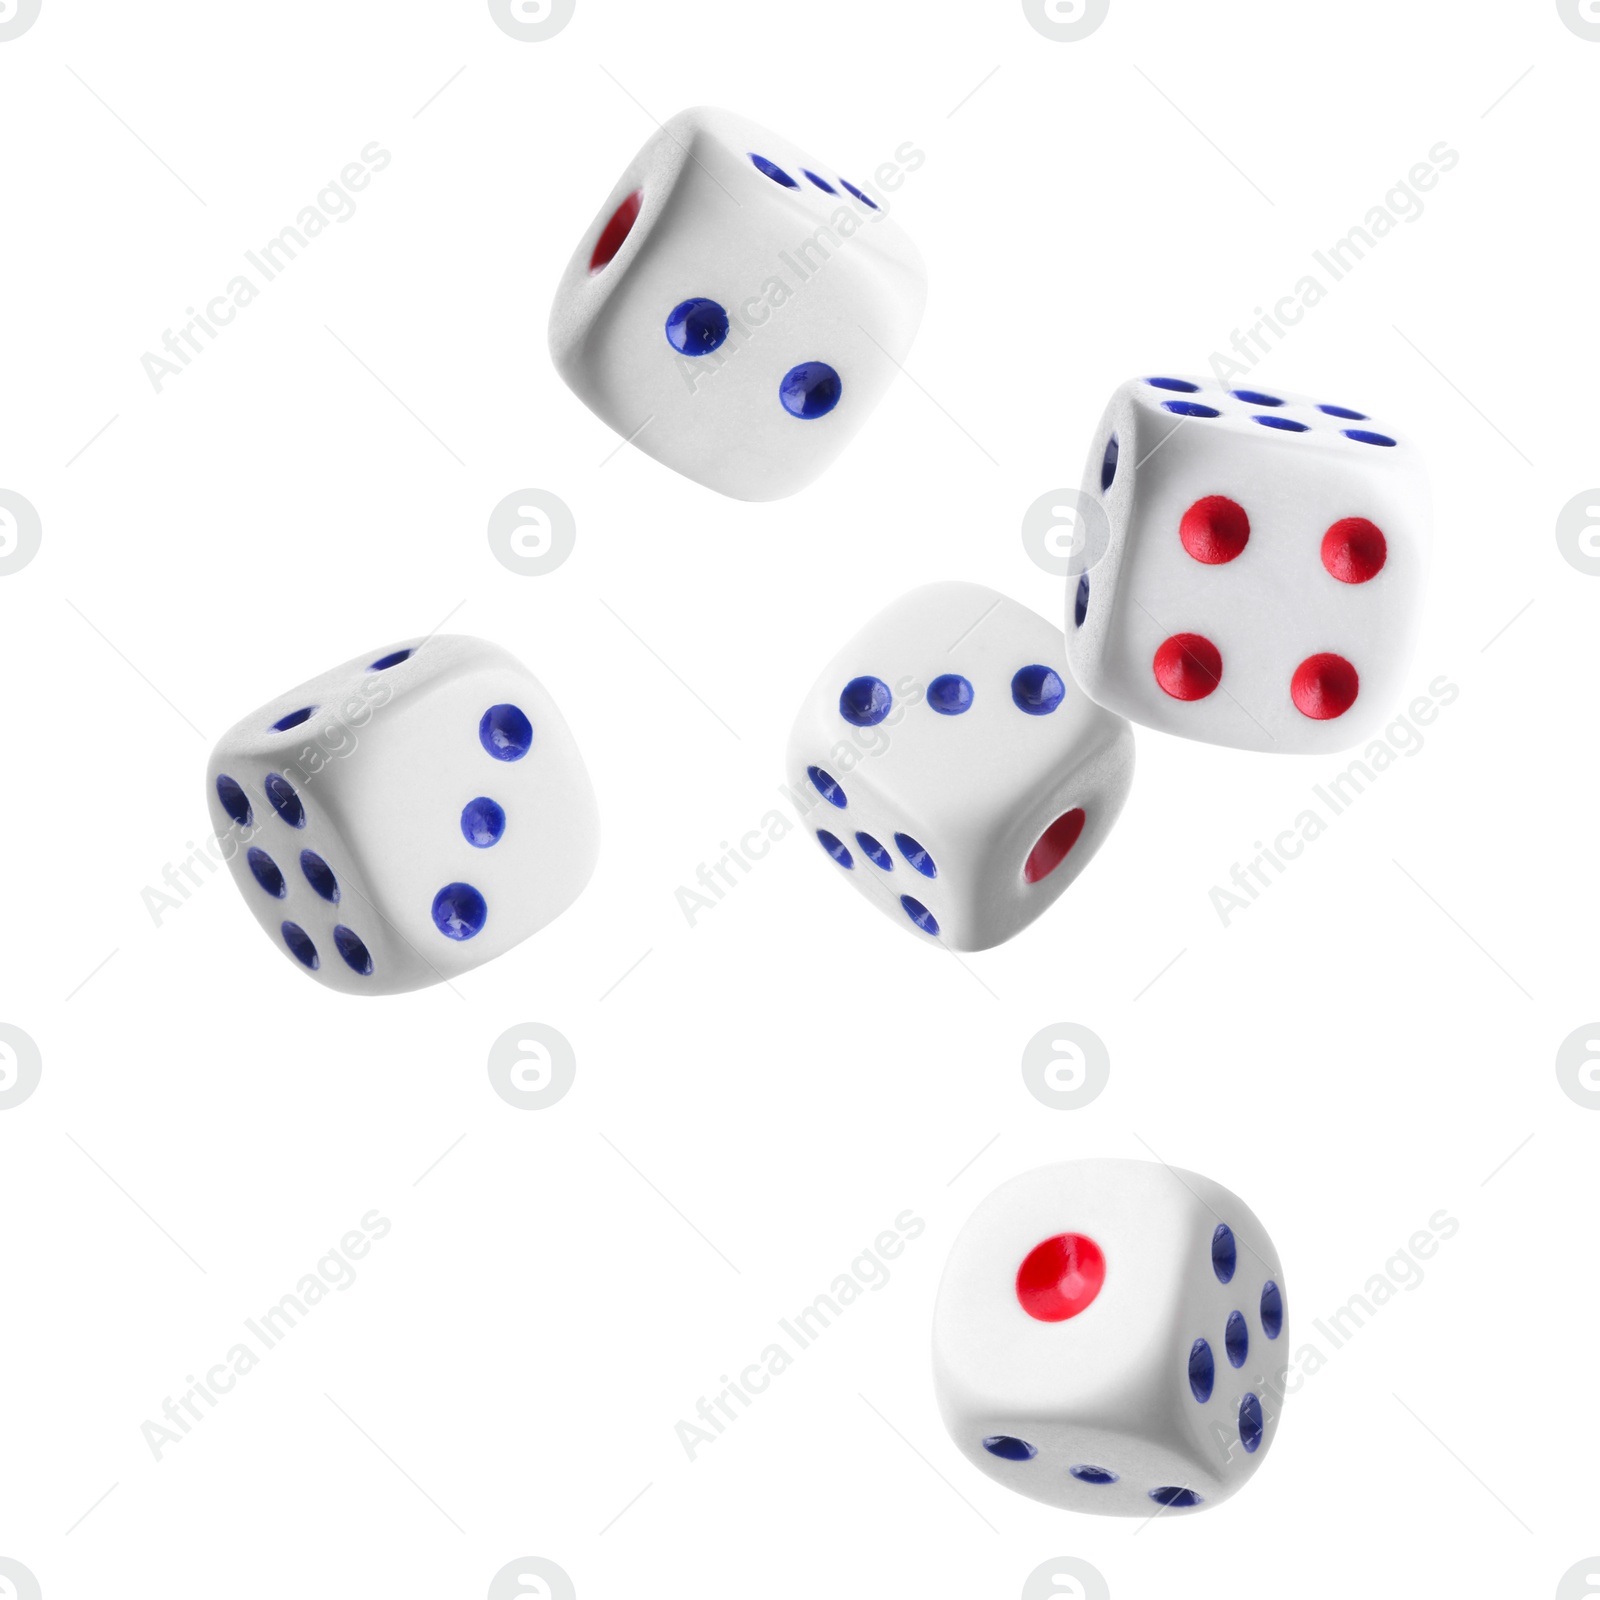 Image of Five dice in air on white background